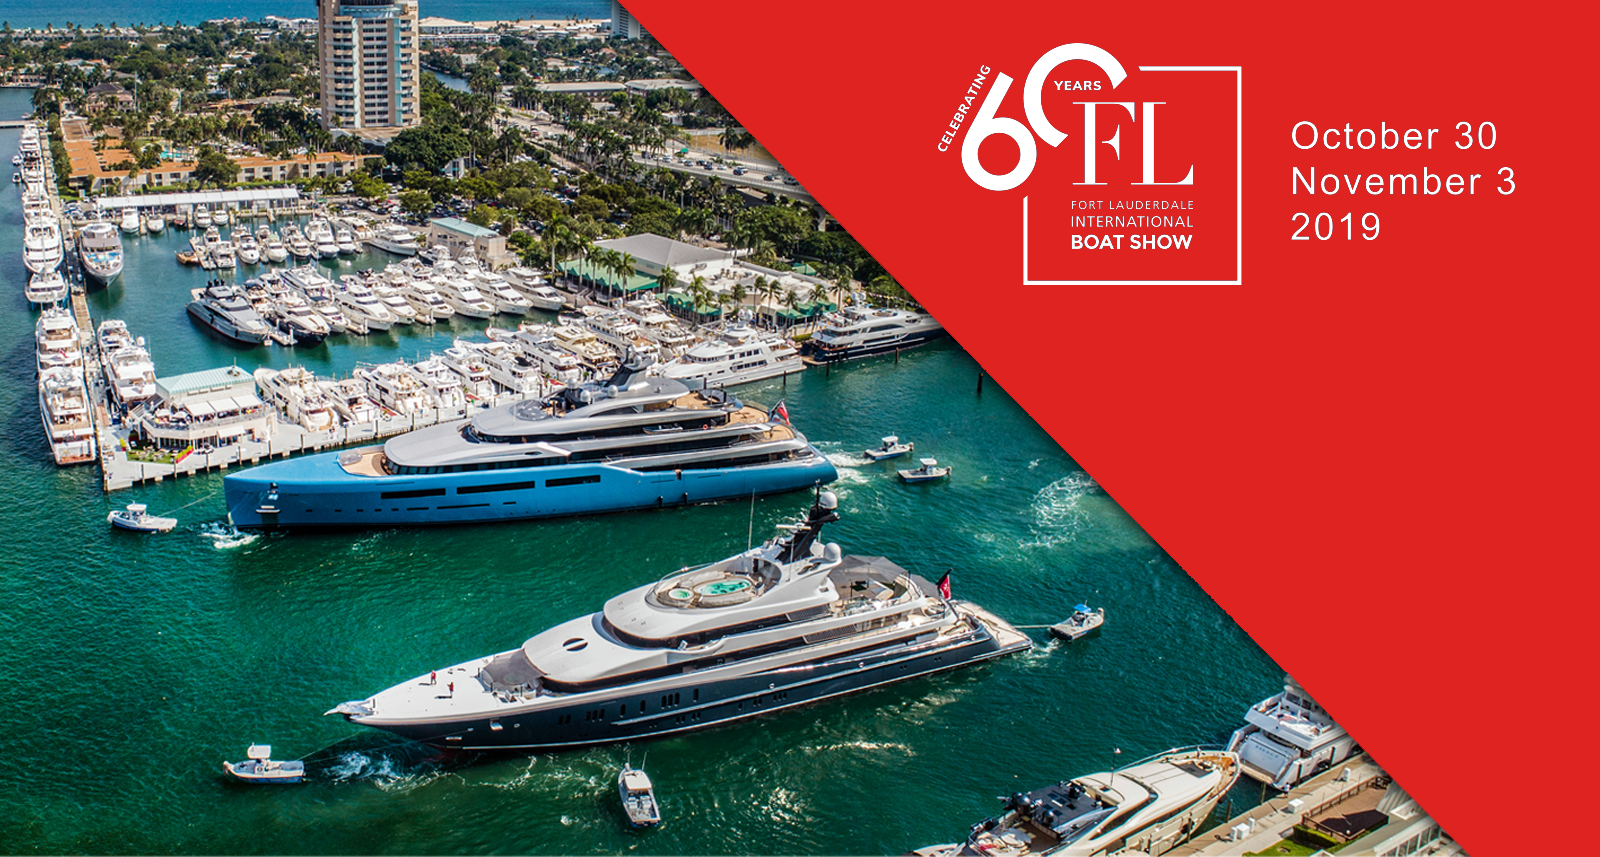 The 60th Annual Fort Lauderdale International Boat Show considered